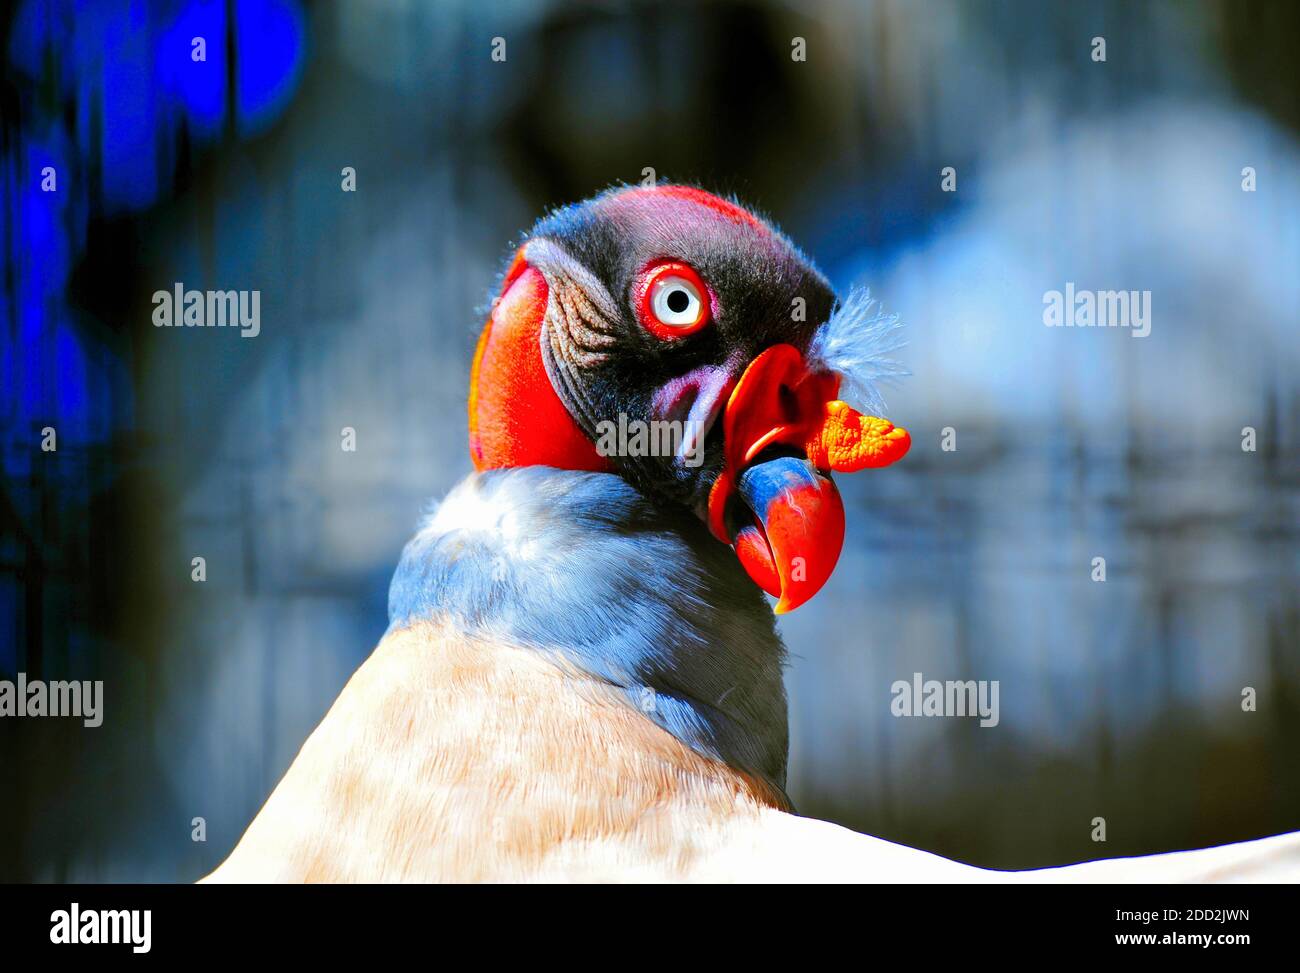 The King Vulture at the Gladys Porter Zoo in Brownsville , Texas, U.S.A.. Stock Photo